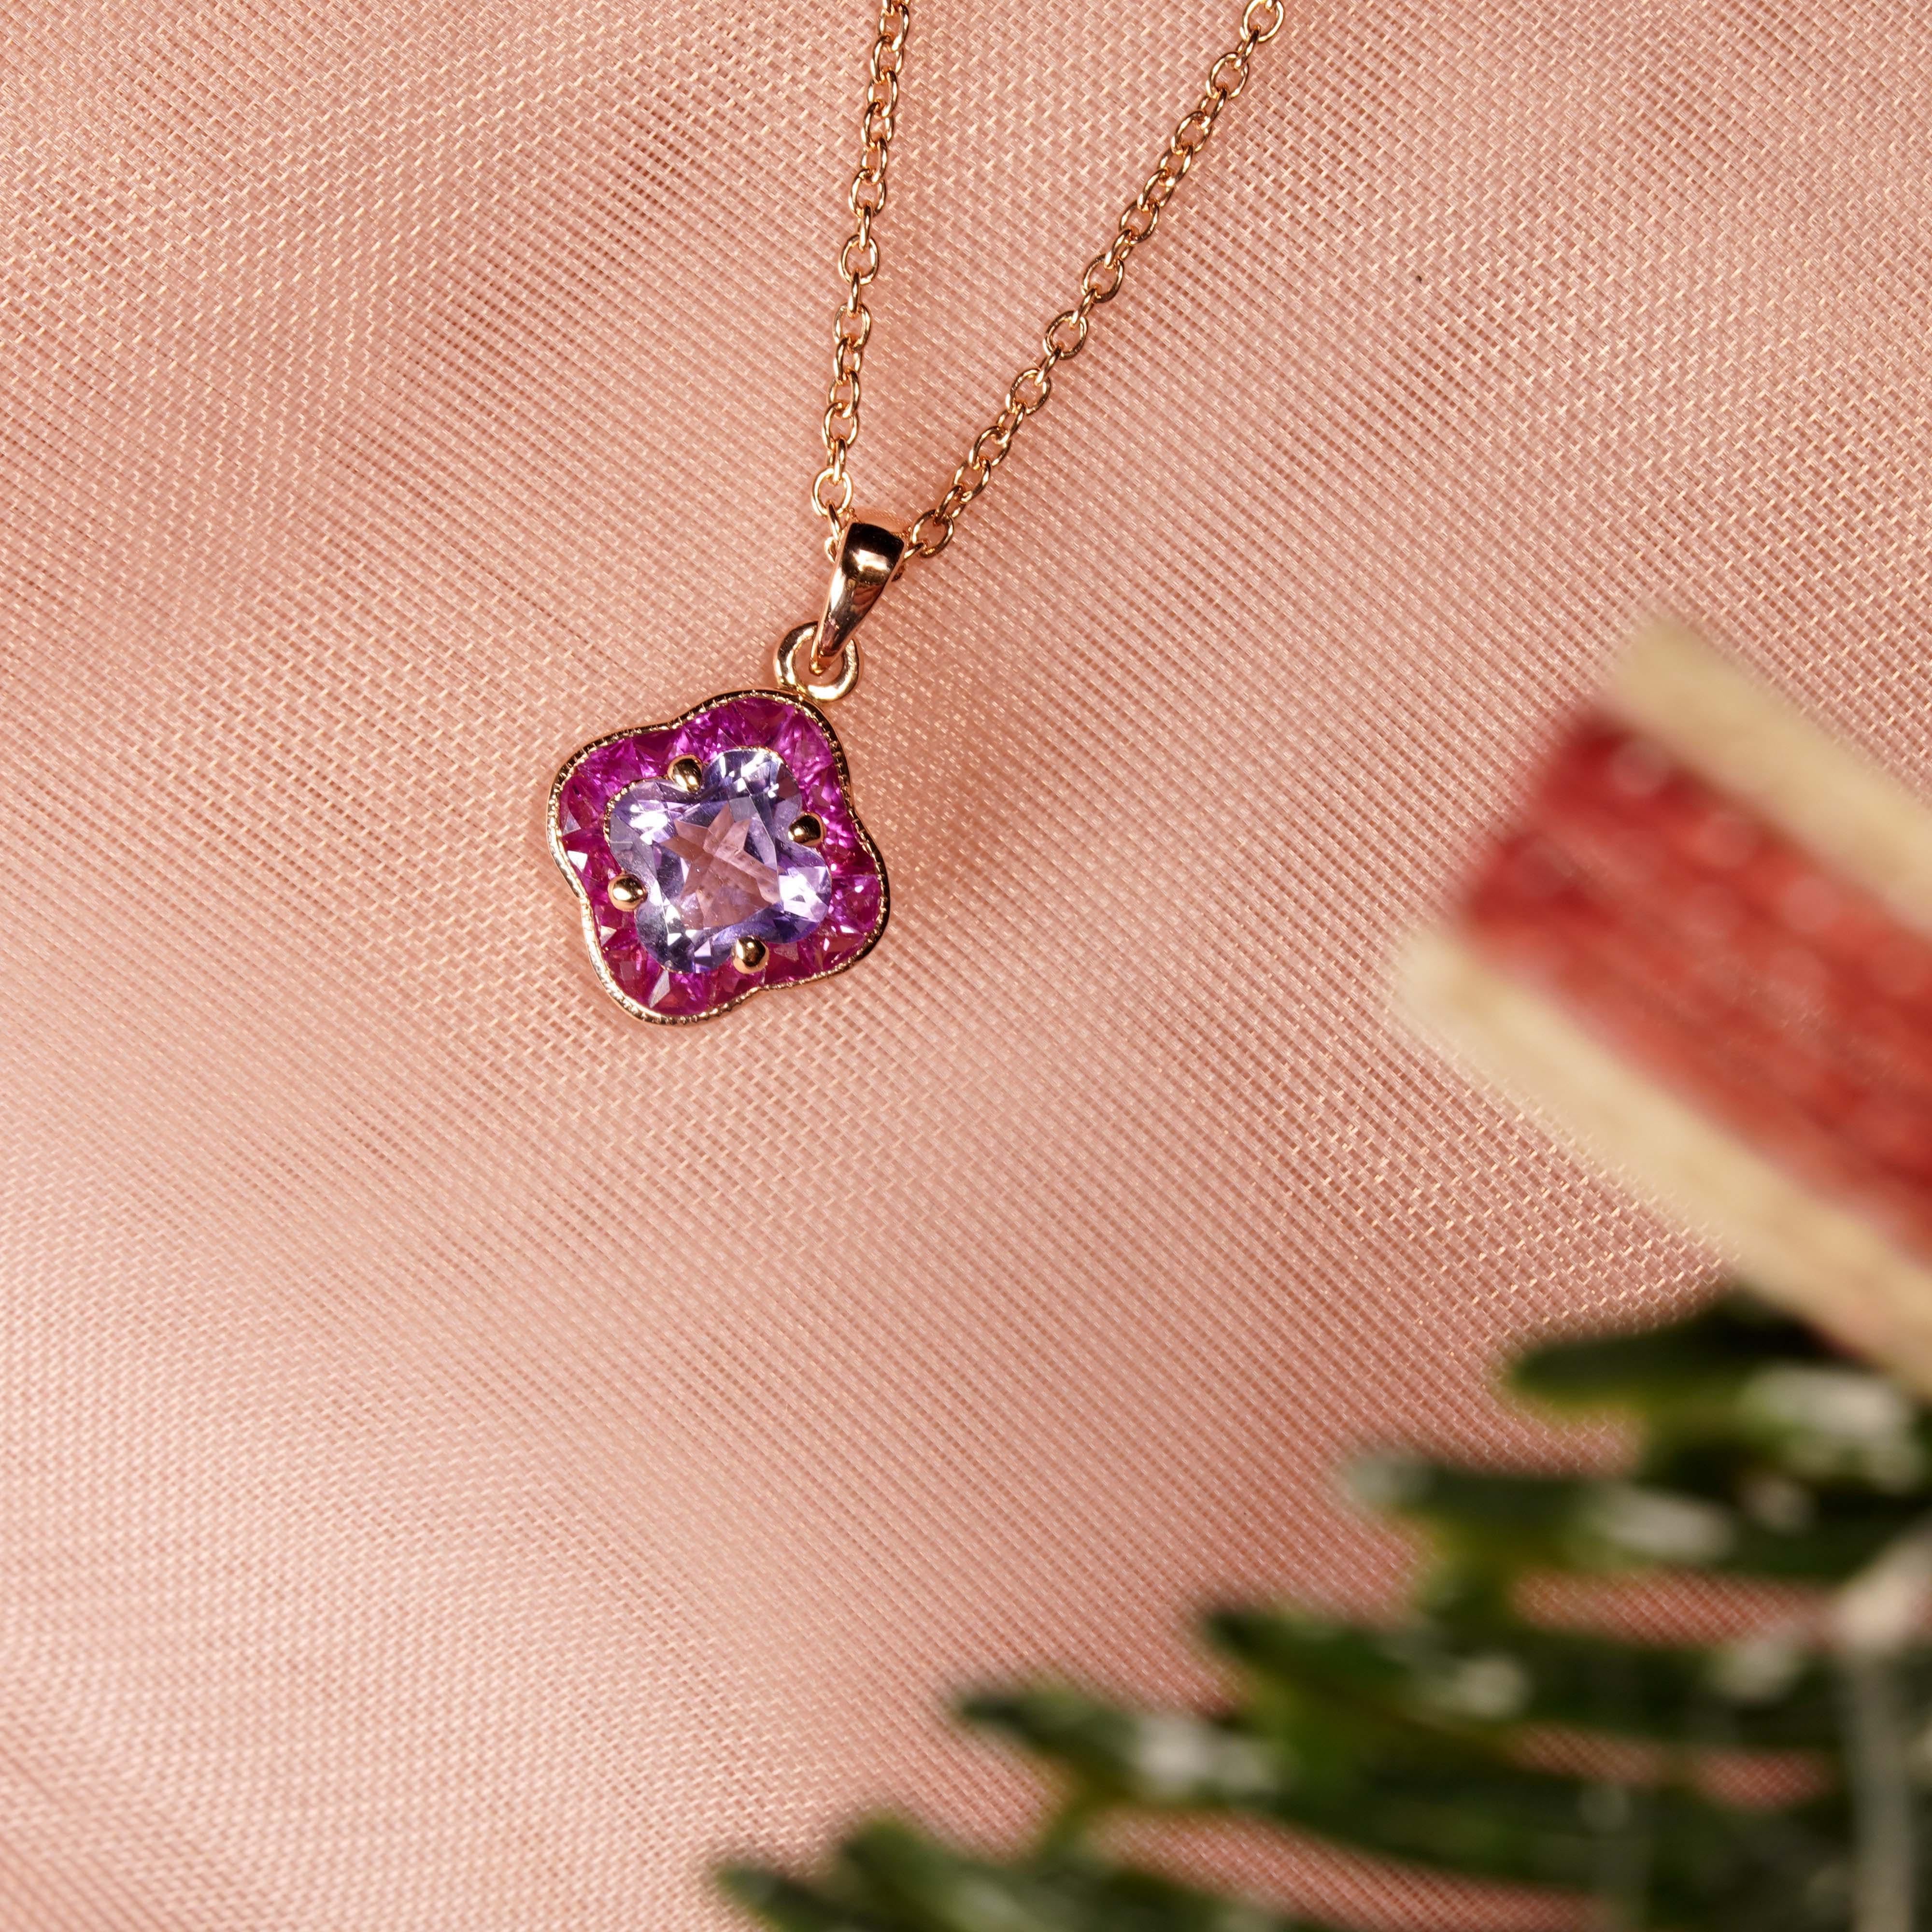 Sophisticate and classy, this design pendant necklace is inspired by the beauty of Pink Perfection Lily Flower. The center stone of shining Lily cut pink amethyst brings you the good luck and fortune, surrounded by French cut rubies, as the flower